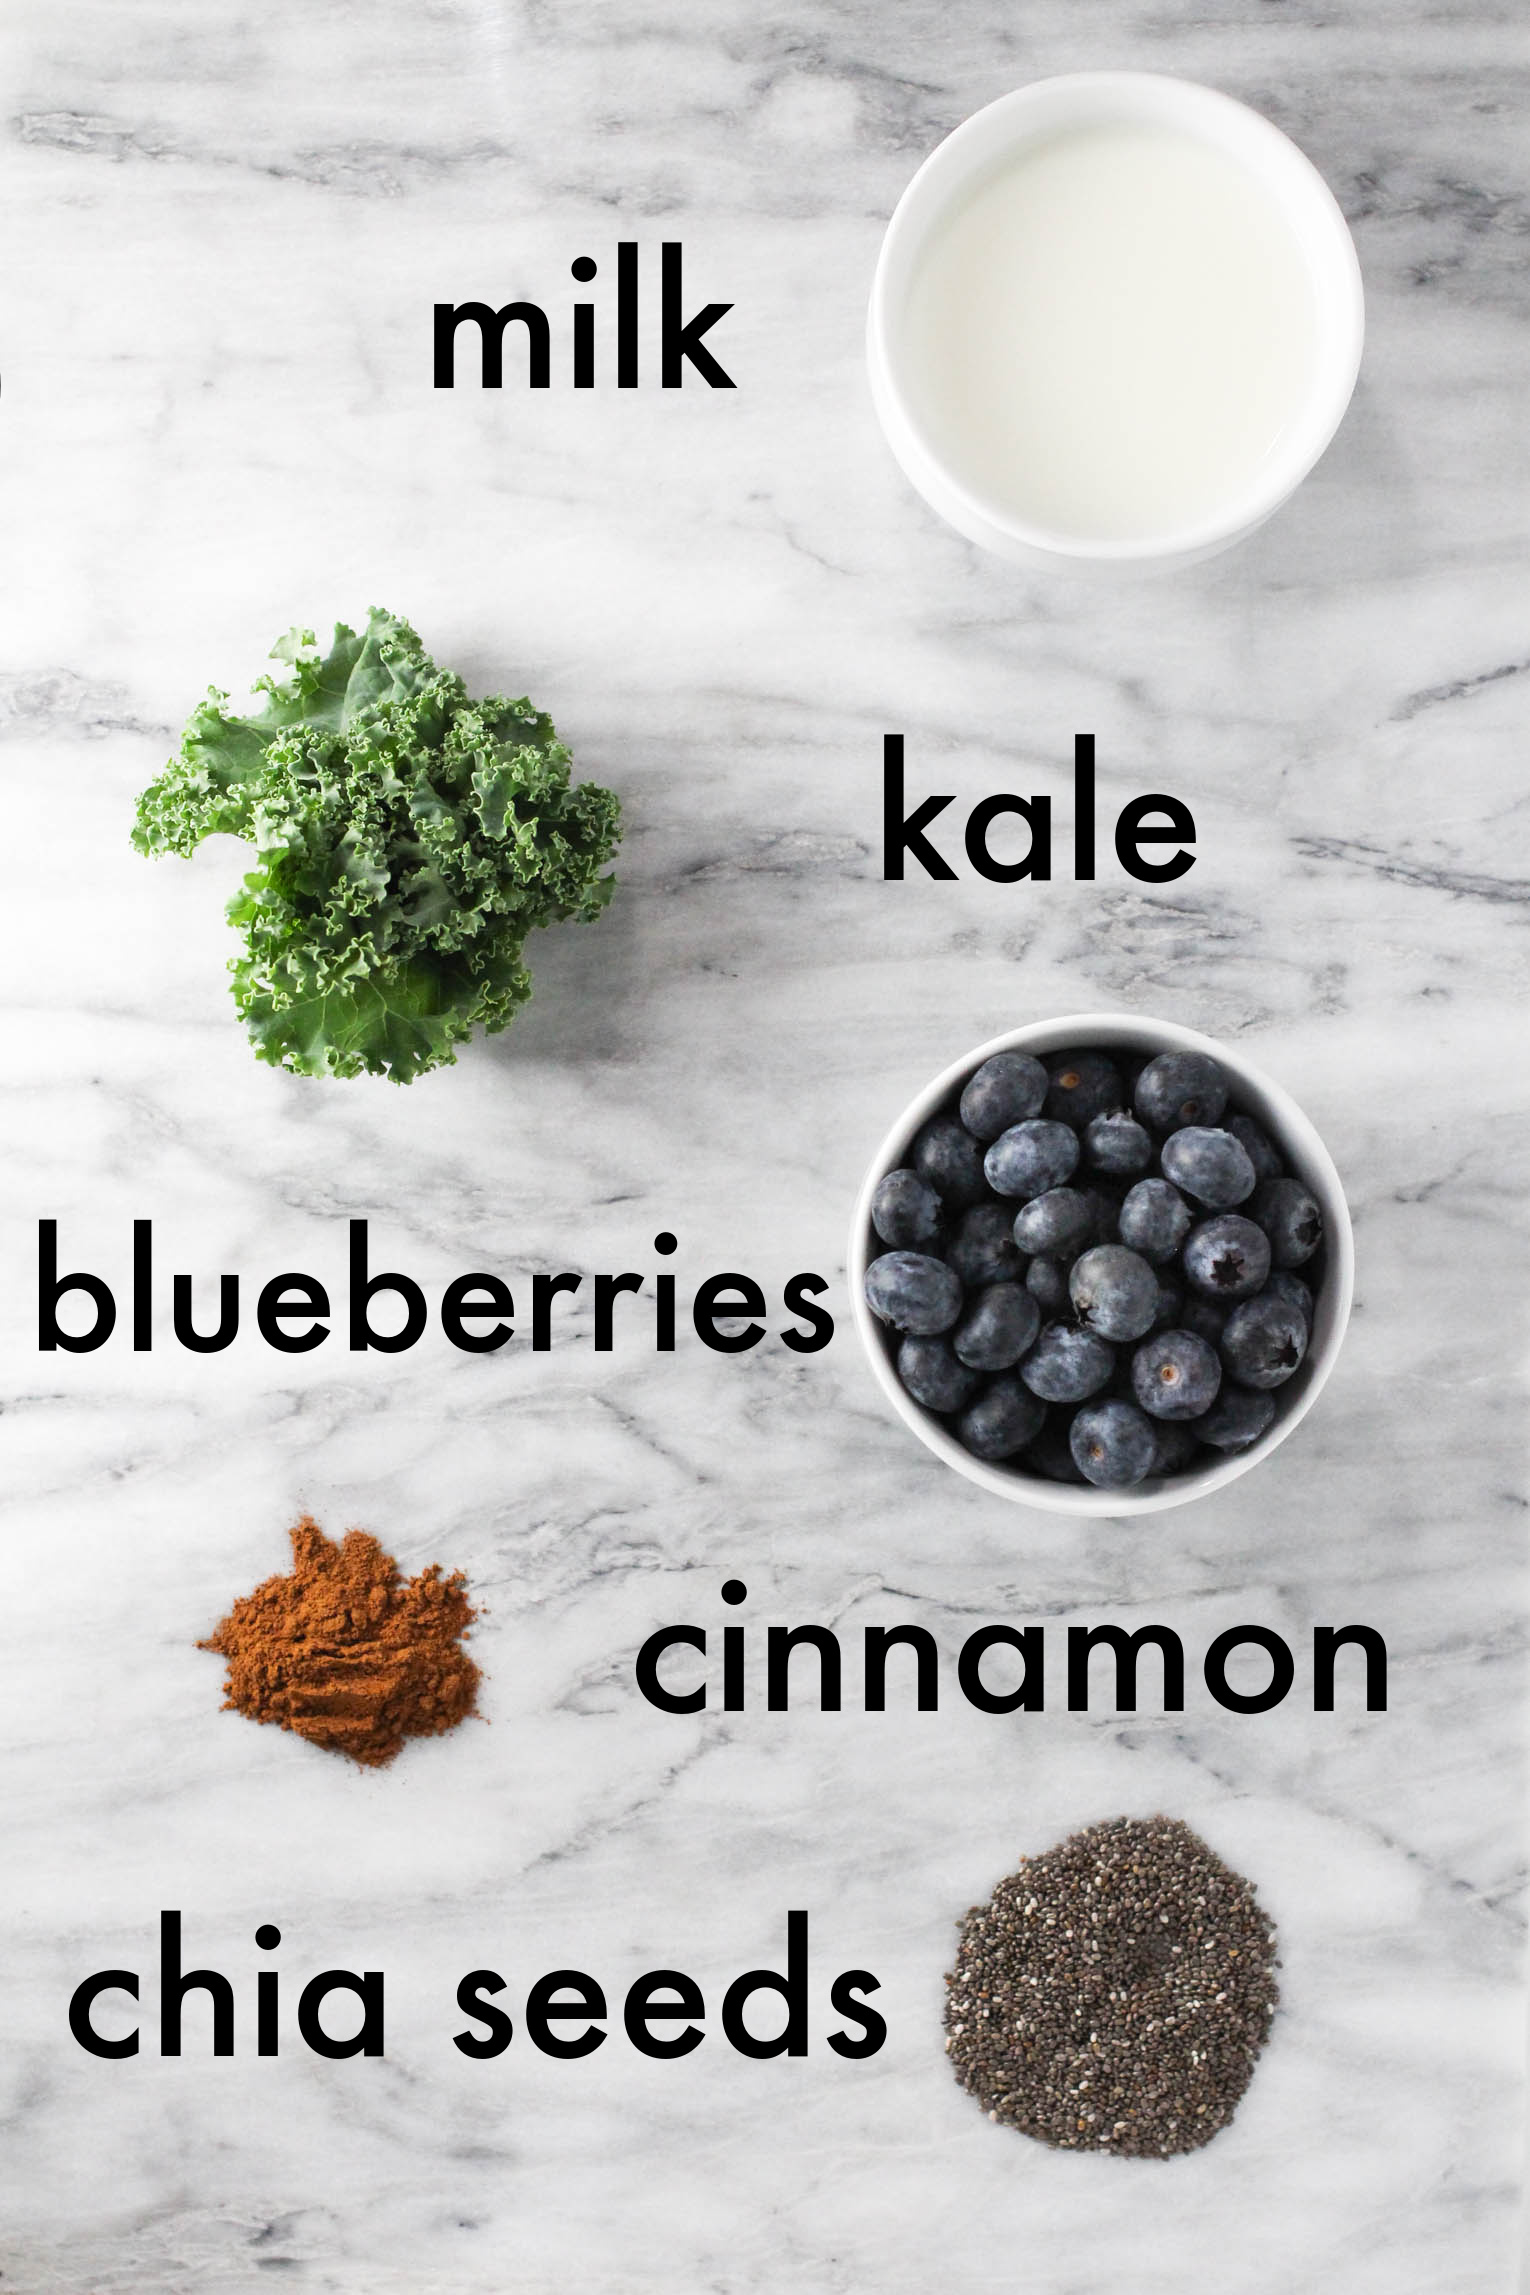 Overhead shot of the smoothy ingredients. The ingredients are labled with text overlay as follows: milk, kale, blueberries, cinnamon, chia seeds.